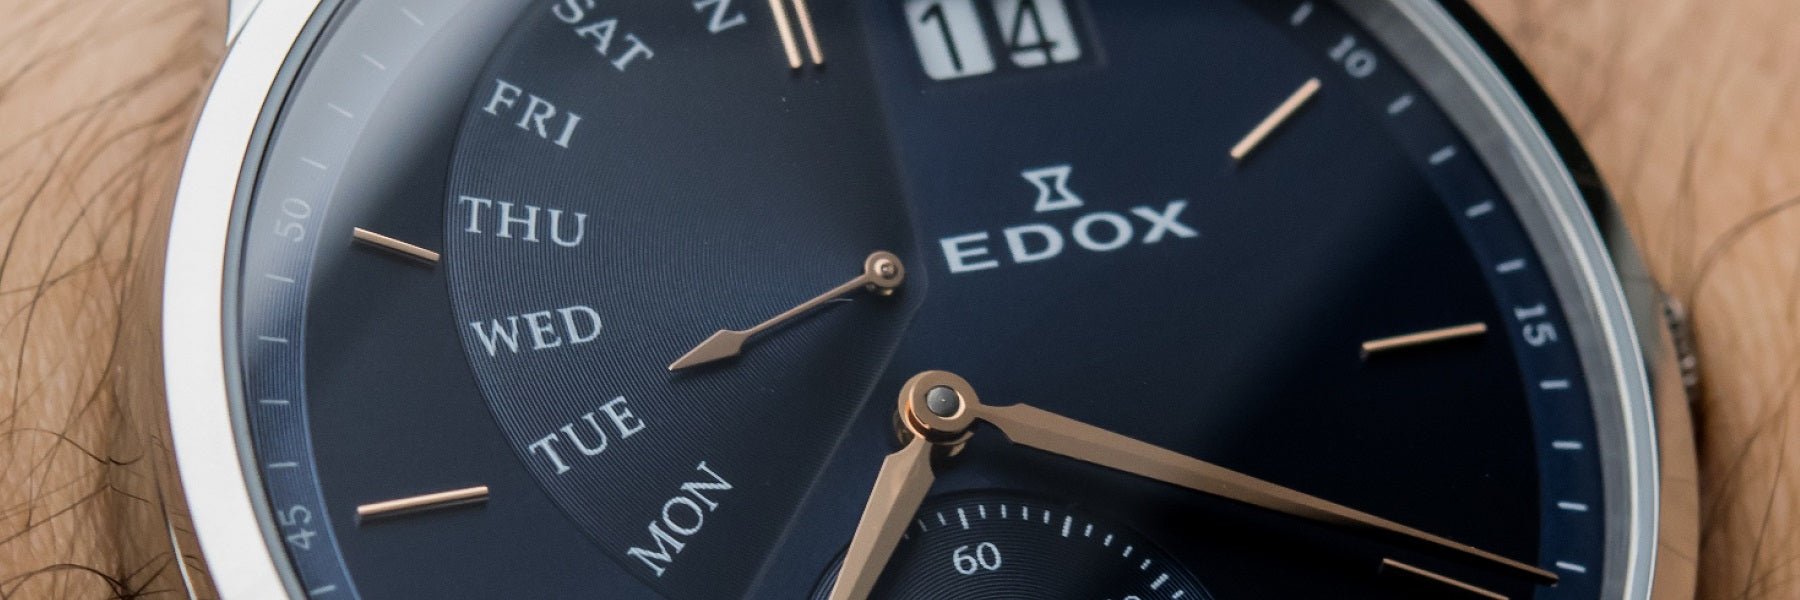 Date and/or Day Date - Edox Watches